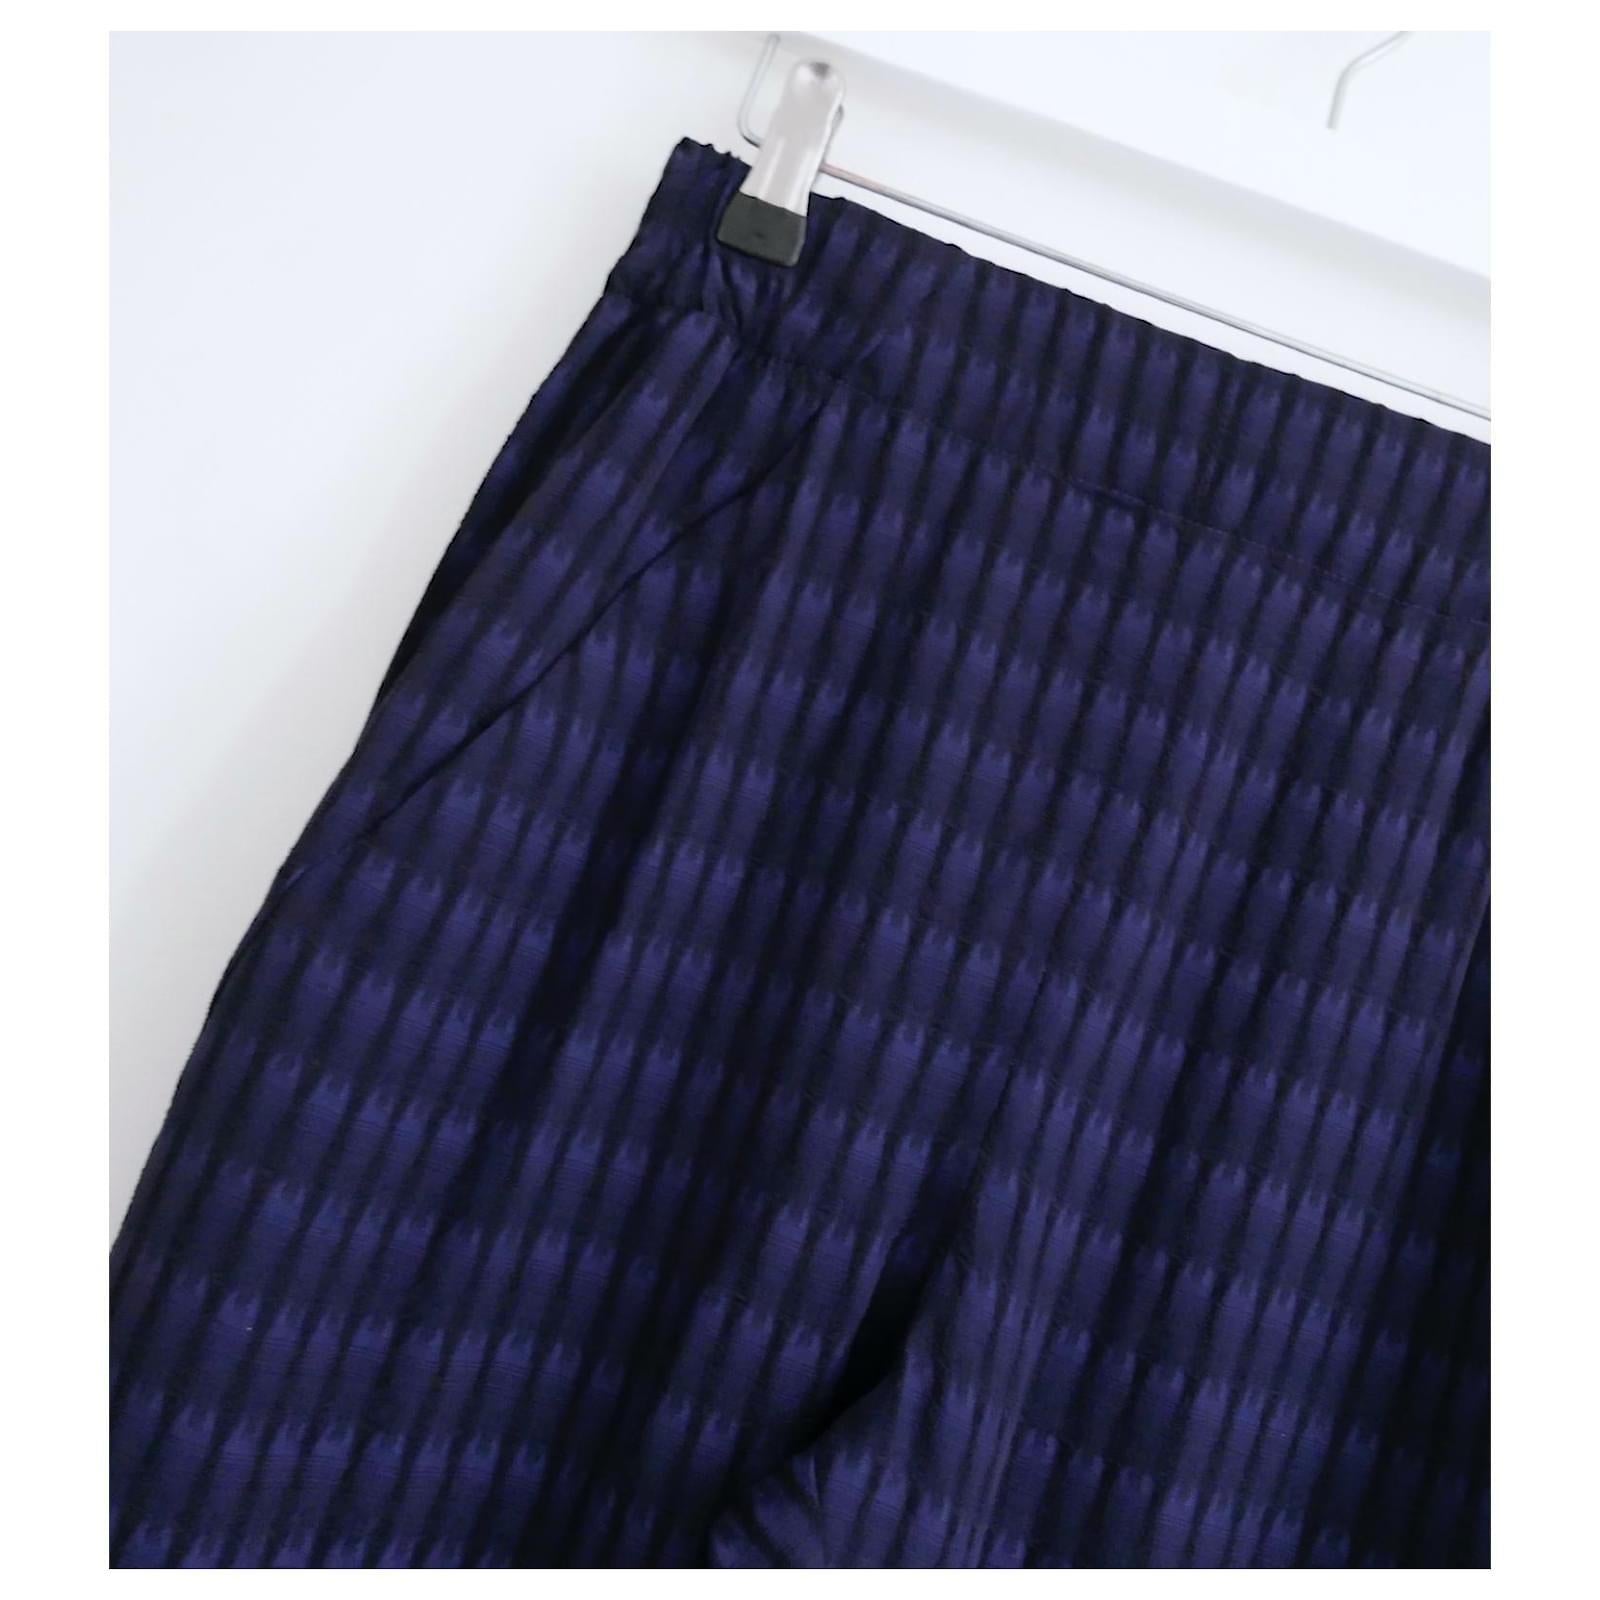 Superbly comfy and cool Zero+ Maria Cornejo loose fit pants. Unworn. 
Made from blue and black graphic weave textured viscose, they have elasticated waist and hem and hip pockets. 
Size US0/UK4 and will fit larger. Measure approx - waist 25-29”,